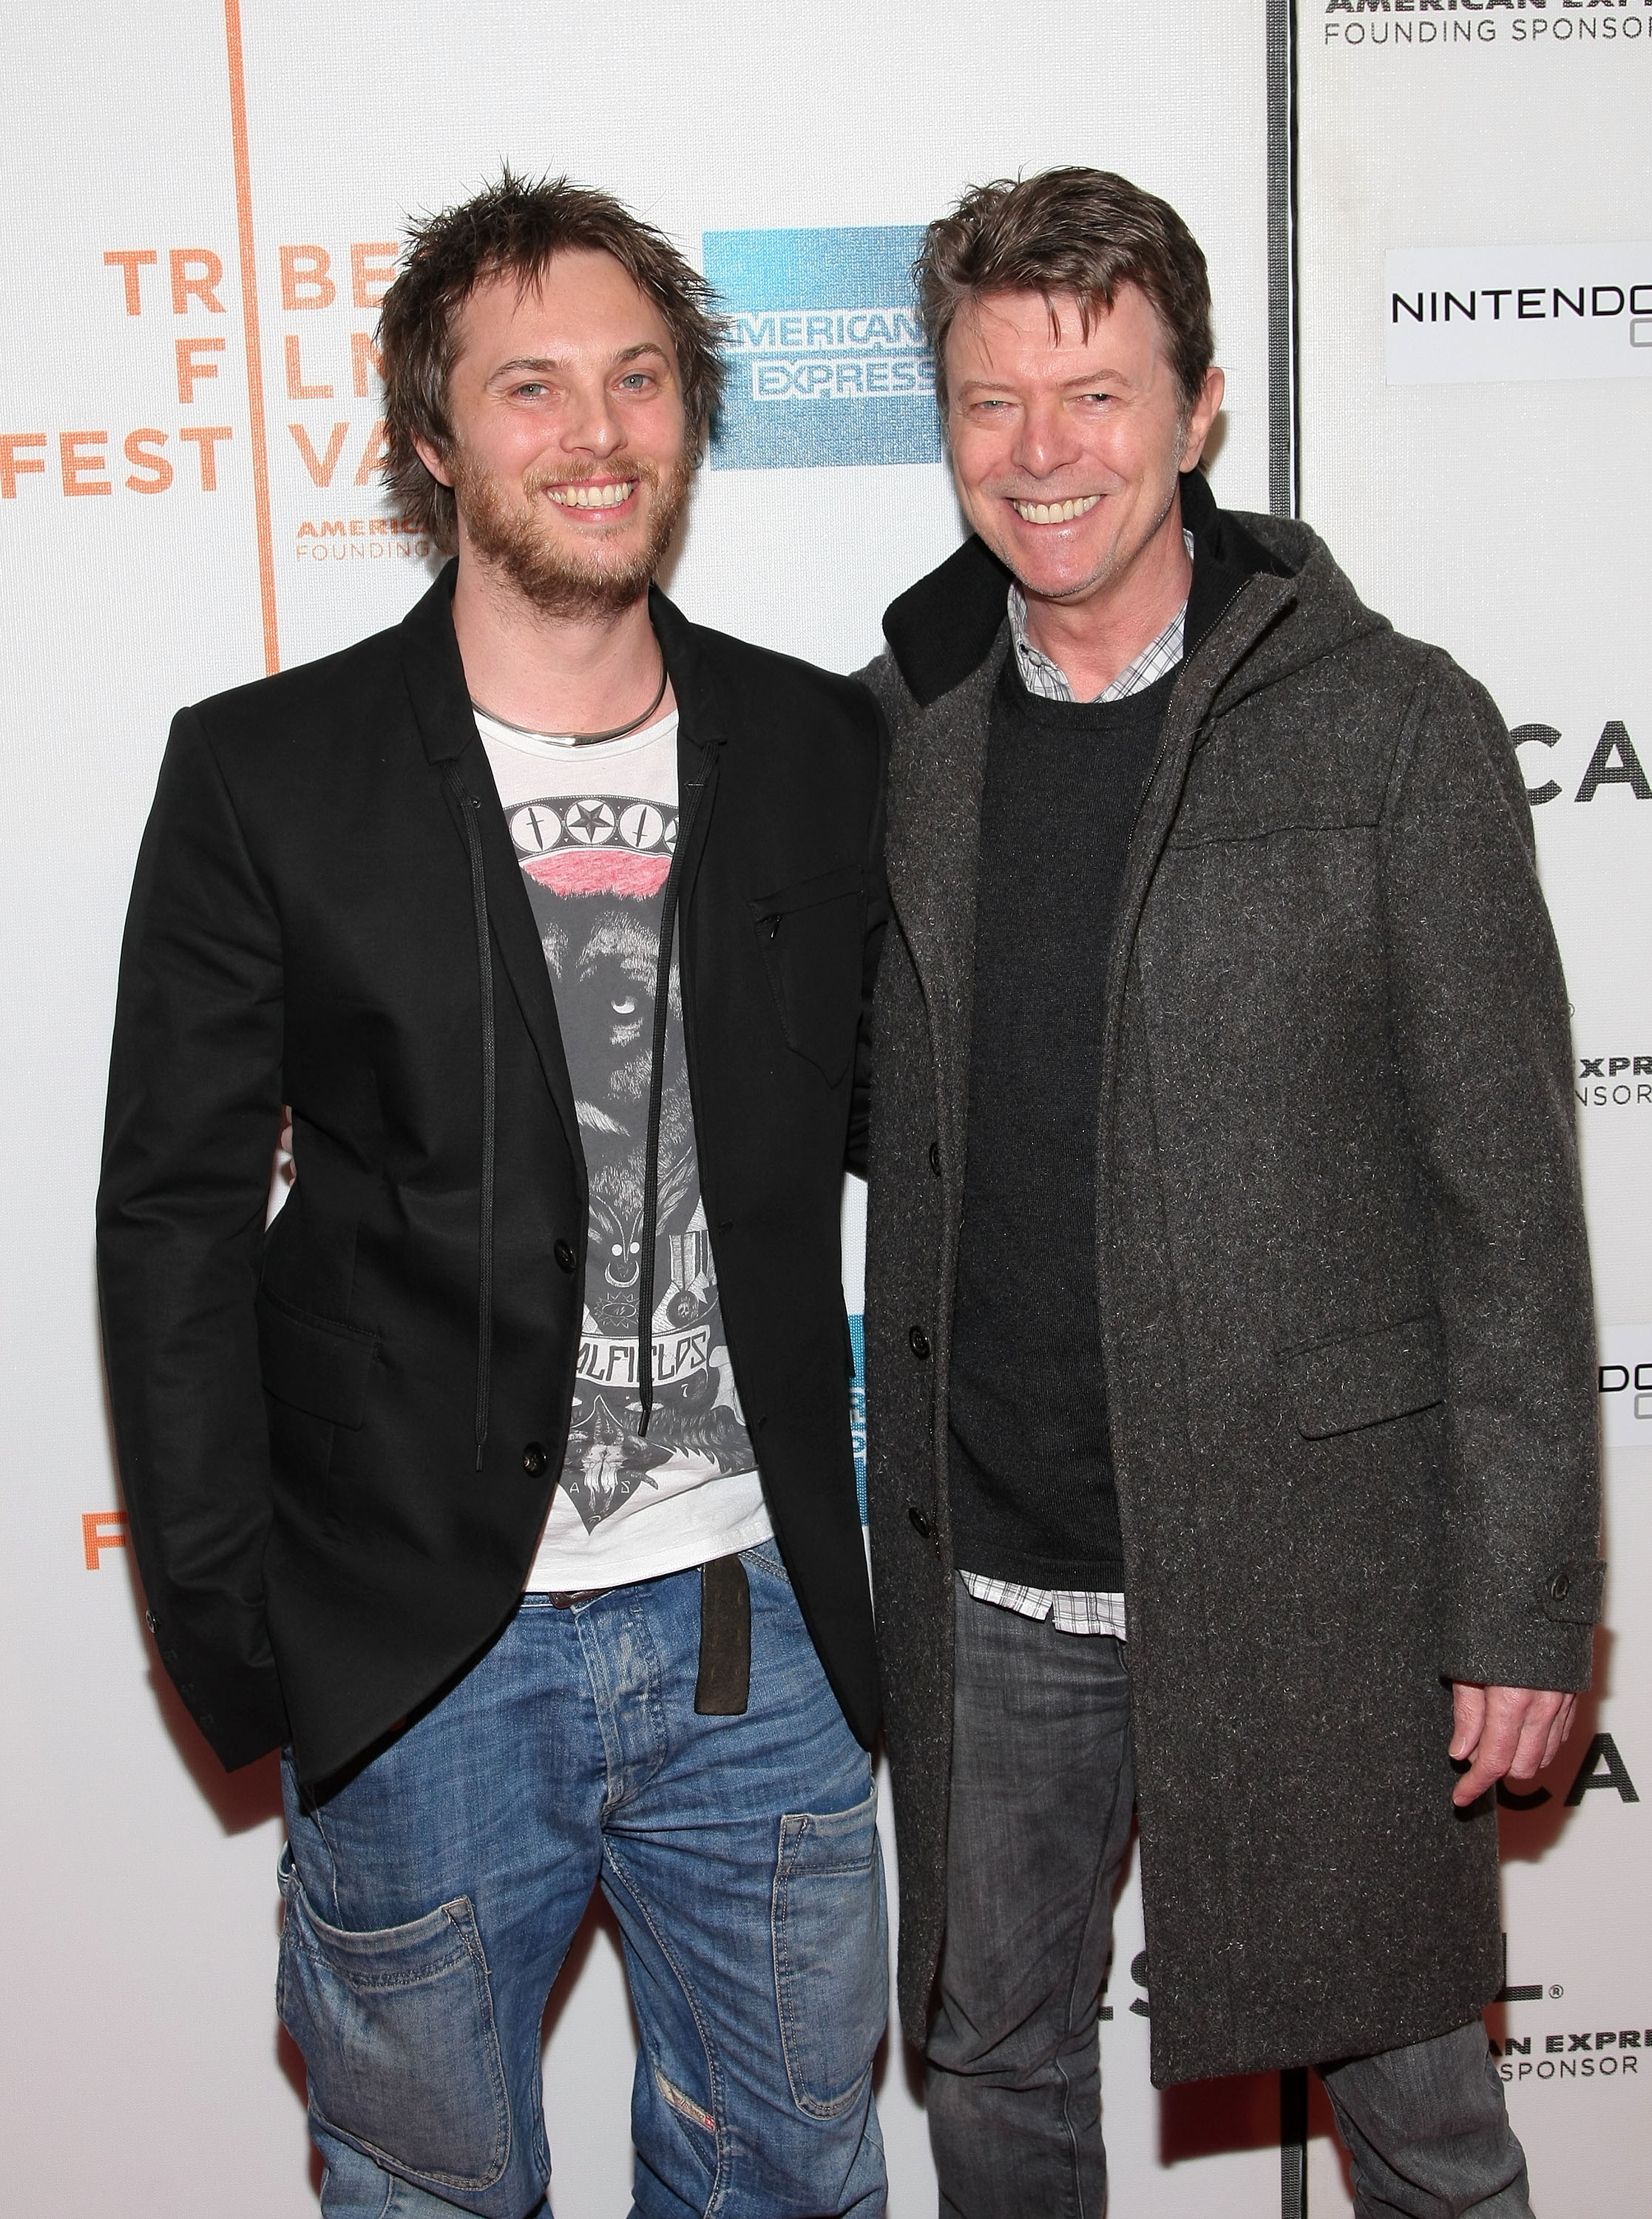 David Bowie supports his son Duncan Jones during the premiere of his film "Moon" on April 30, 2009 | Source: Getty Images